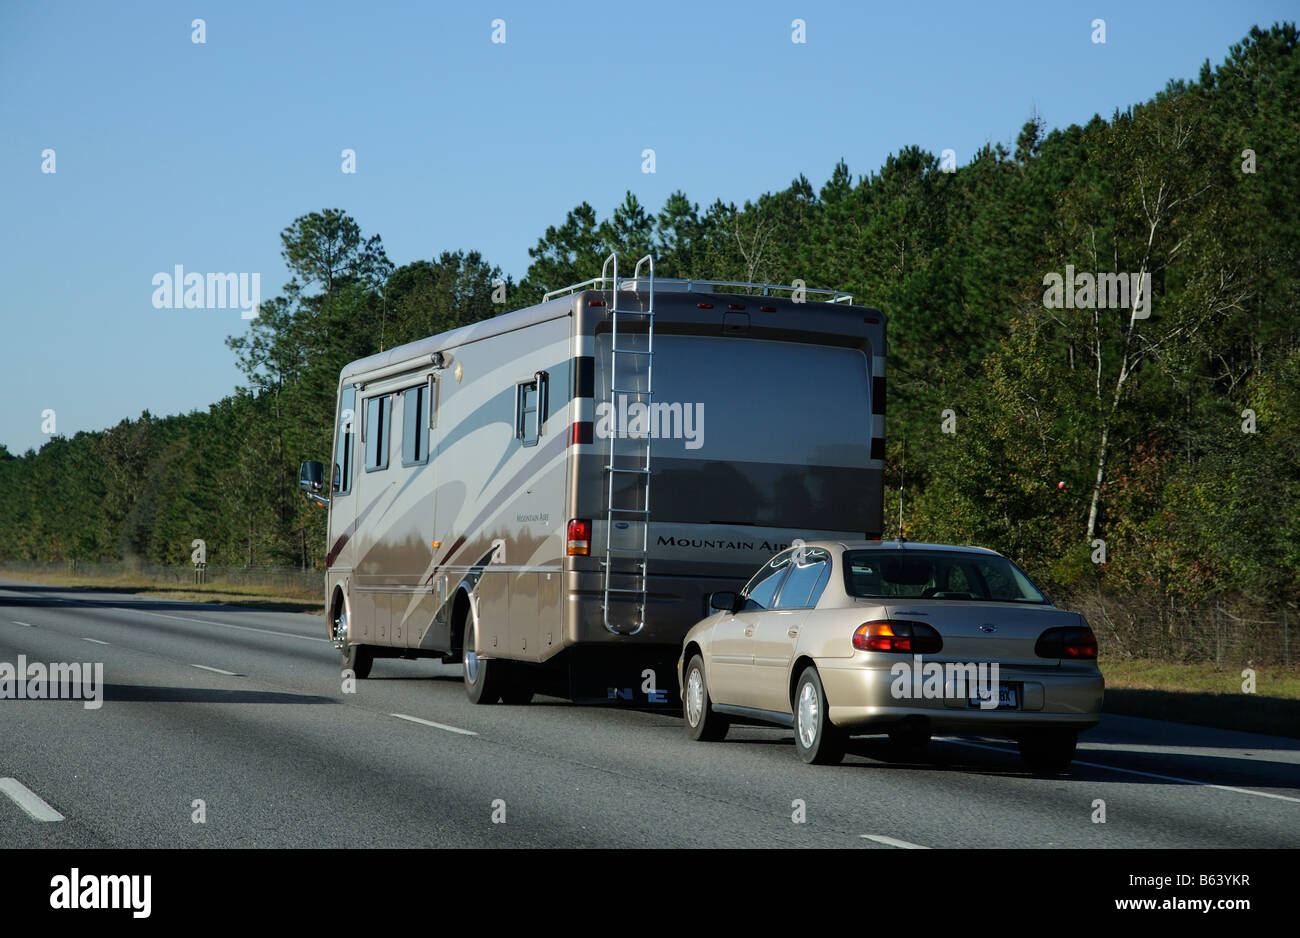 Mountain Aire RV southbound on Interstate 95 USA heading towards Florida America United States towing a Chevrolet Malibu car Stock Photo